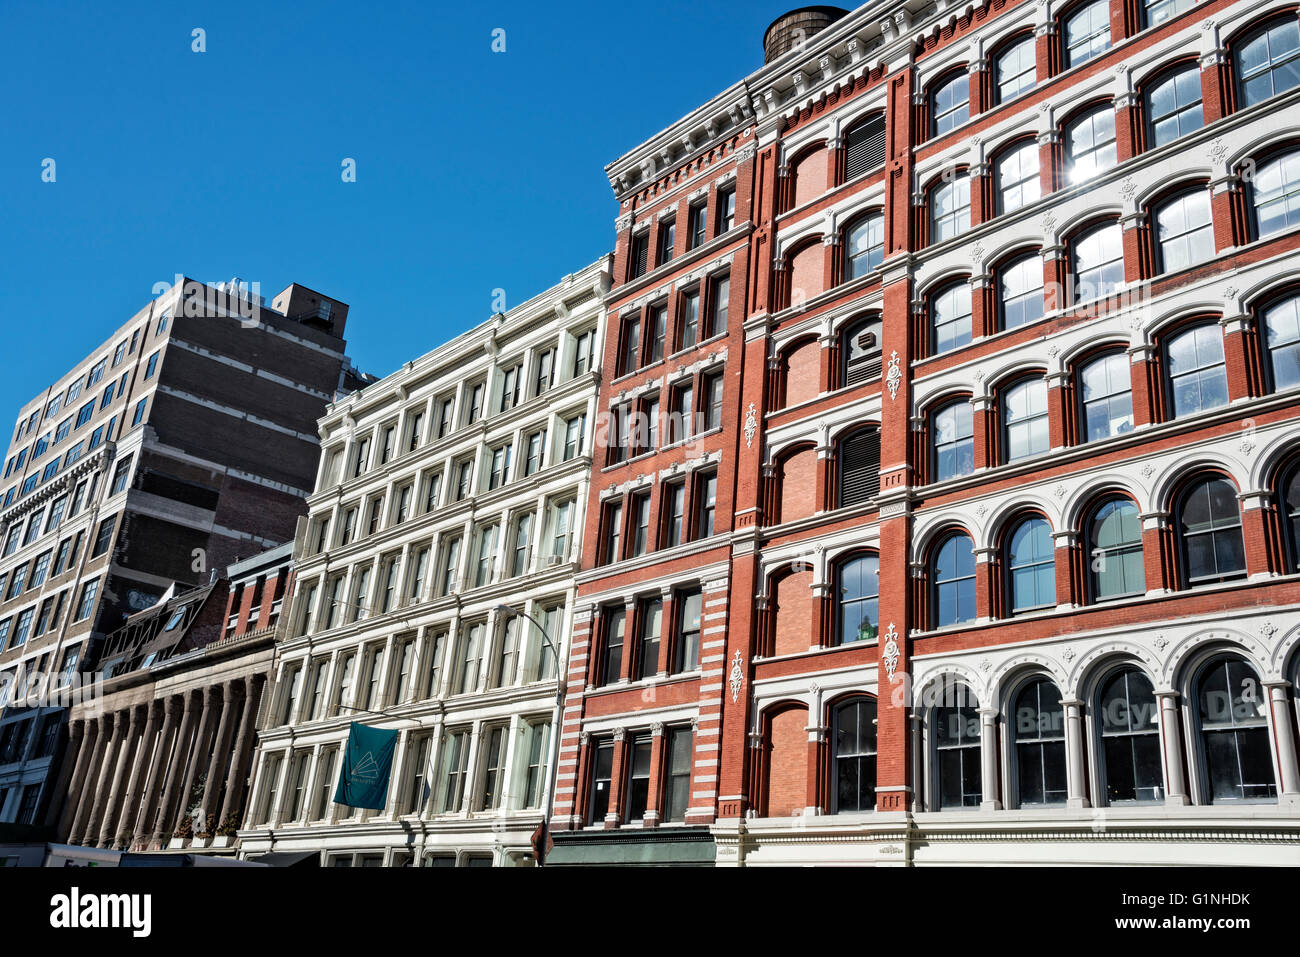 New York City, Manhattan, Downtown, Cast Iron Buildings on Lafayette Street, Just South of Astor Place. Stock Photo